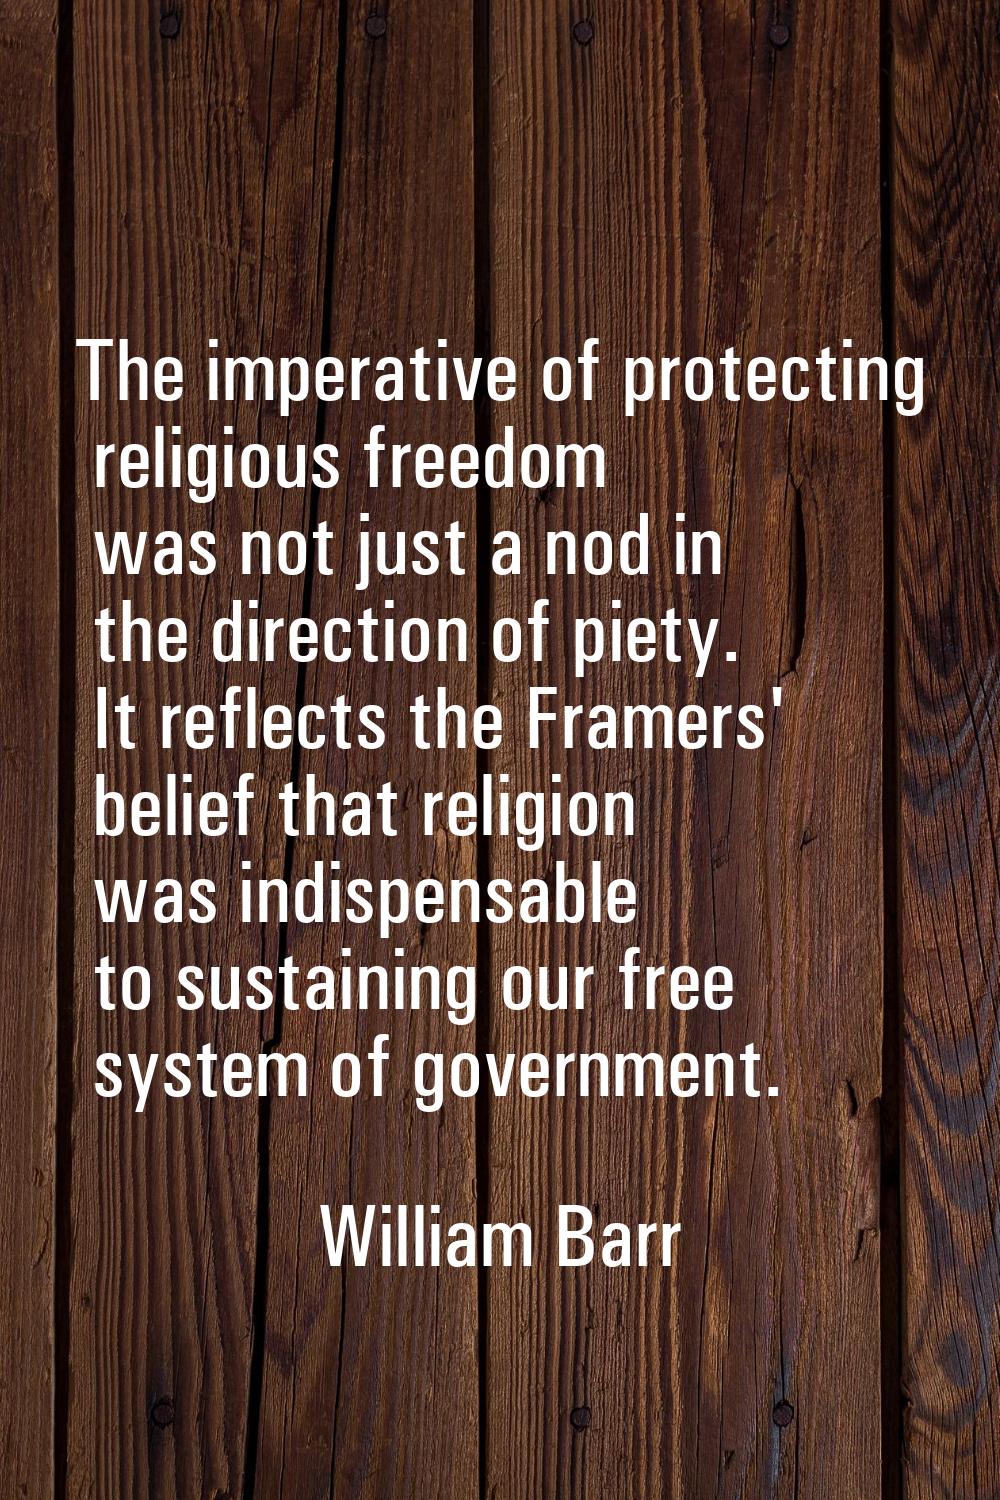 The imperative of protecting religious freedom was not just a nod in the direction of piety. It ref